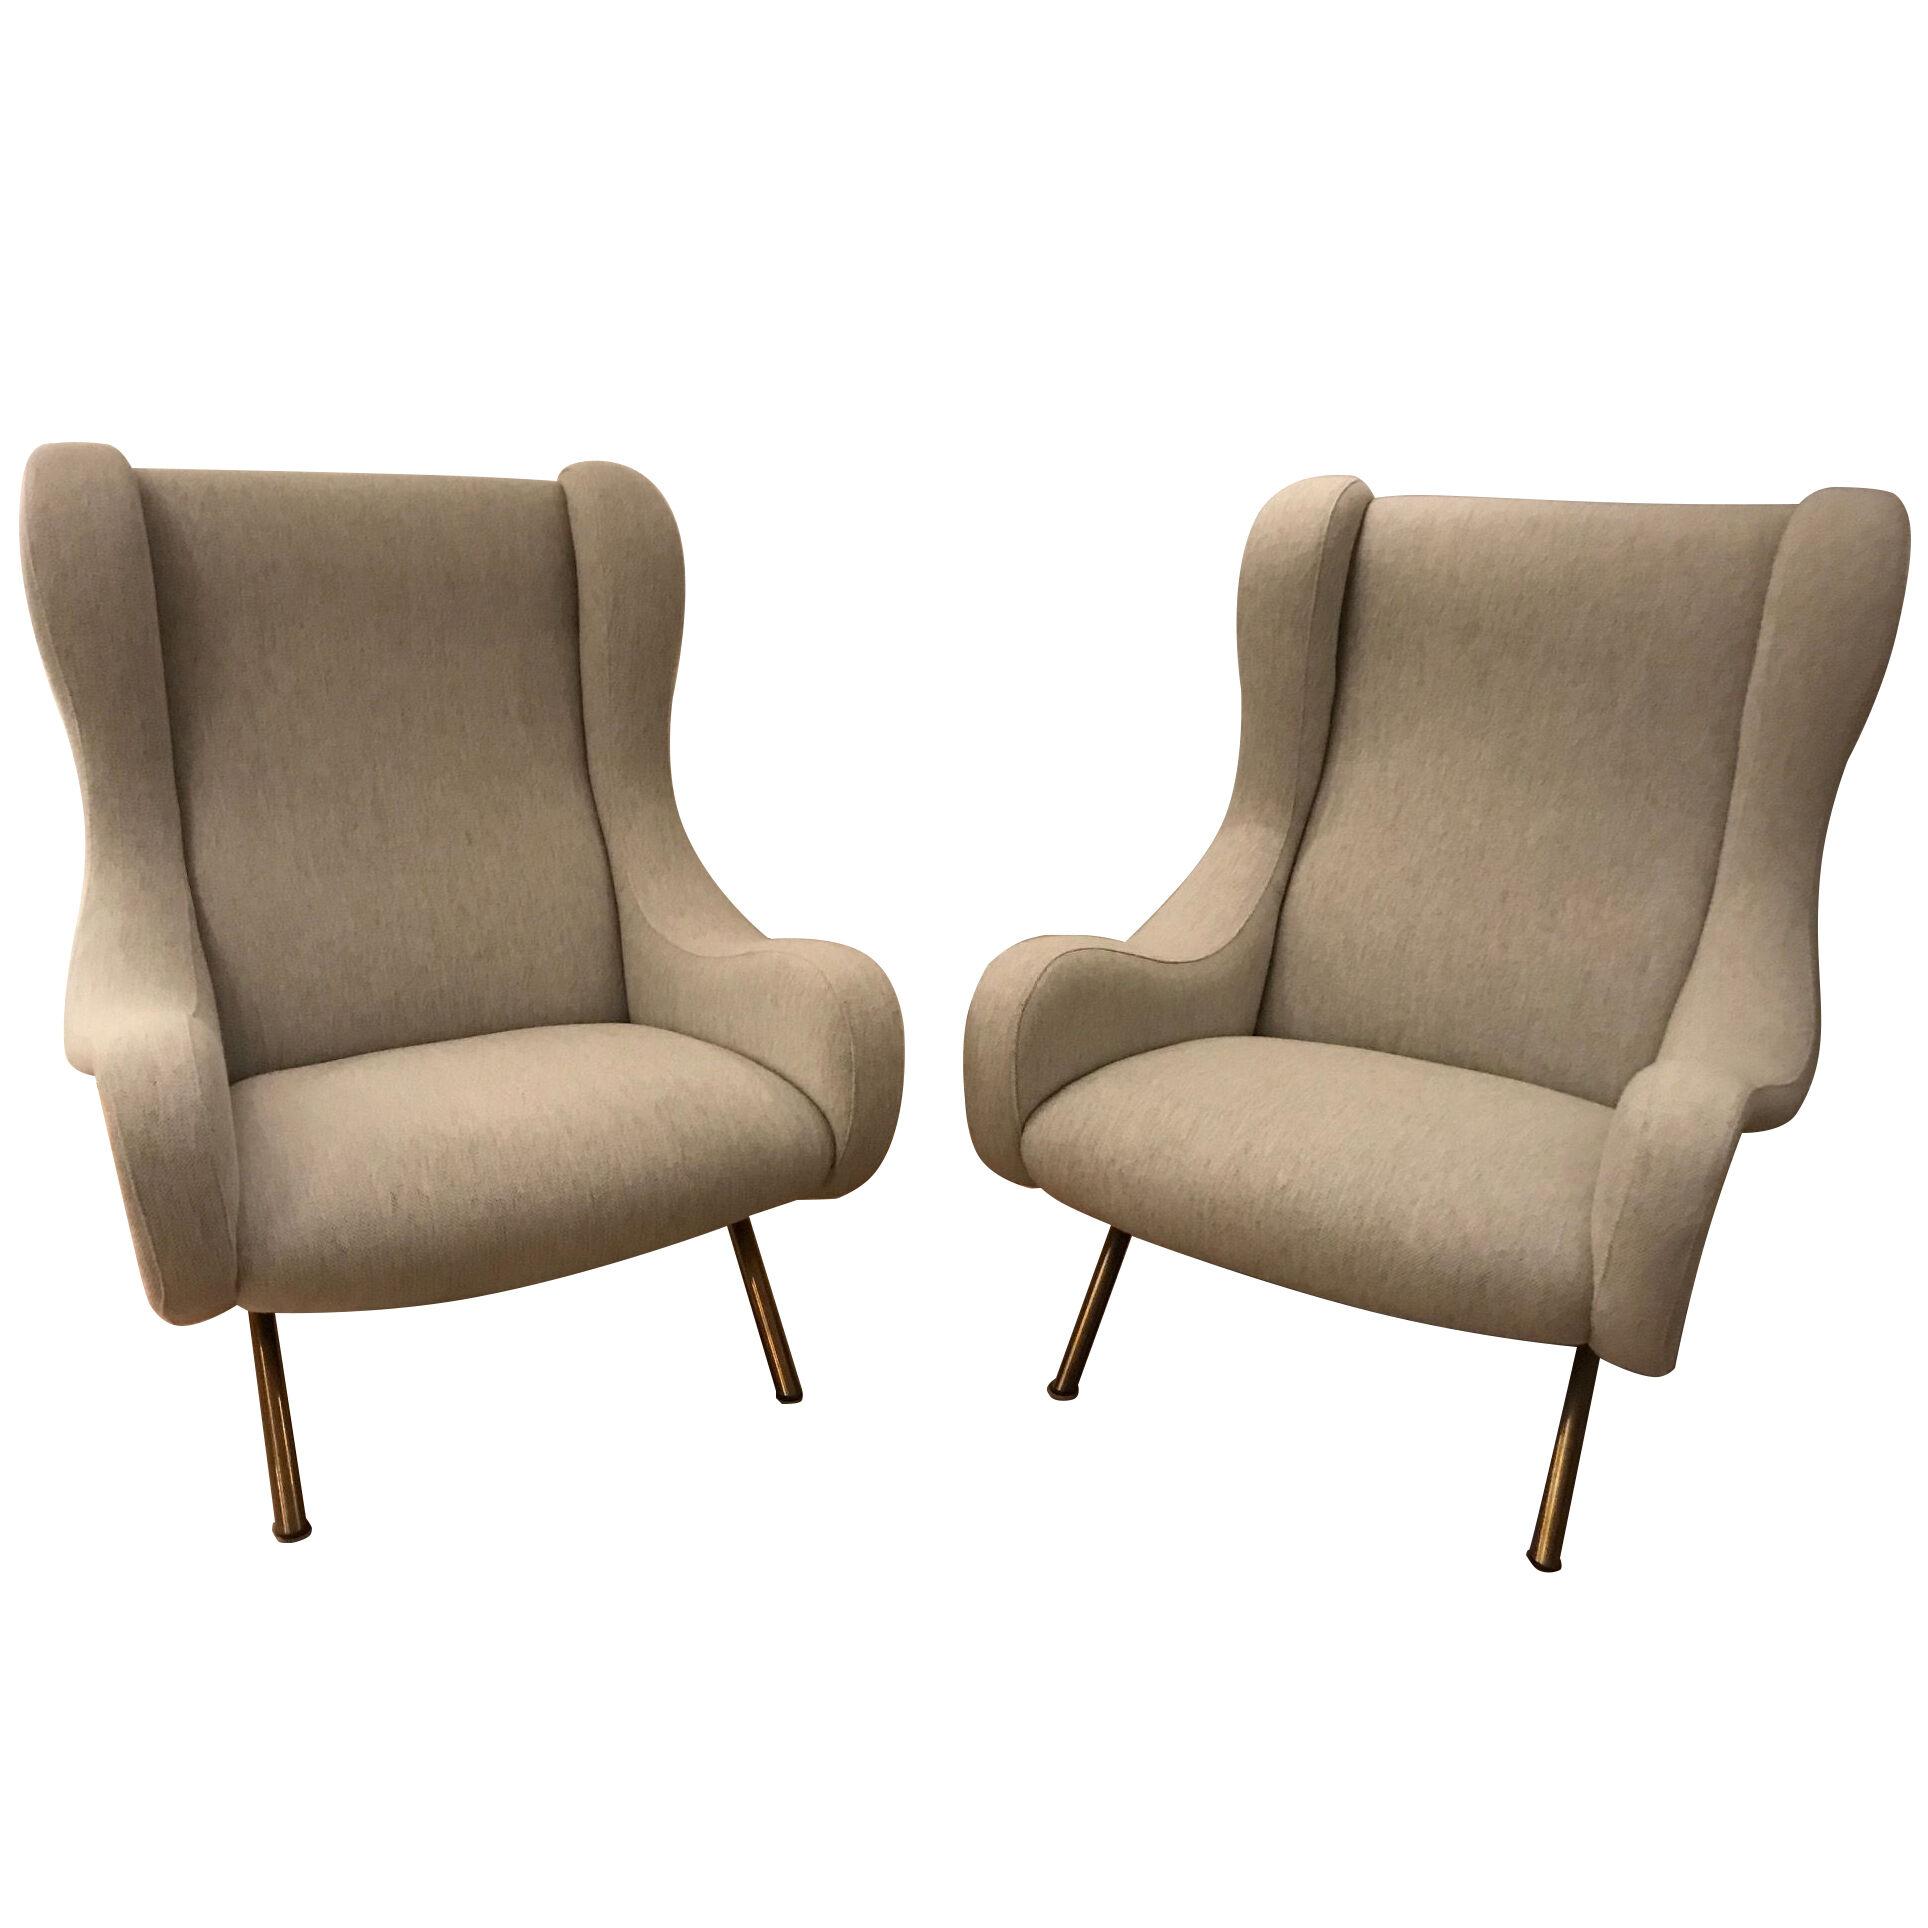 Pair of "Senior" Armchairs by Marco Zanuso for Arflex, 1950s